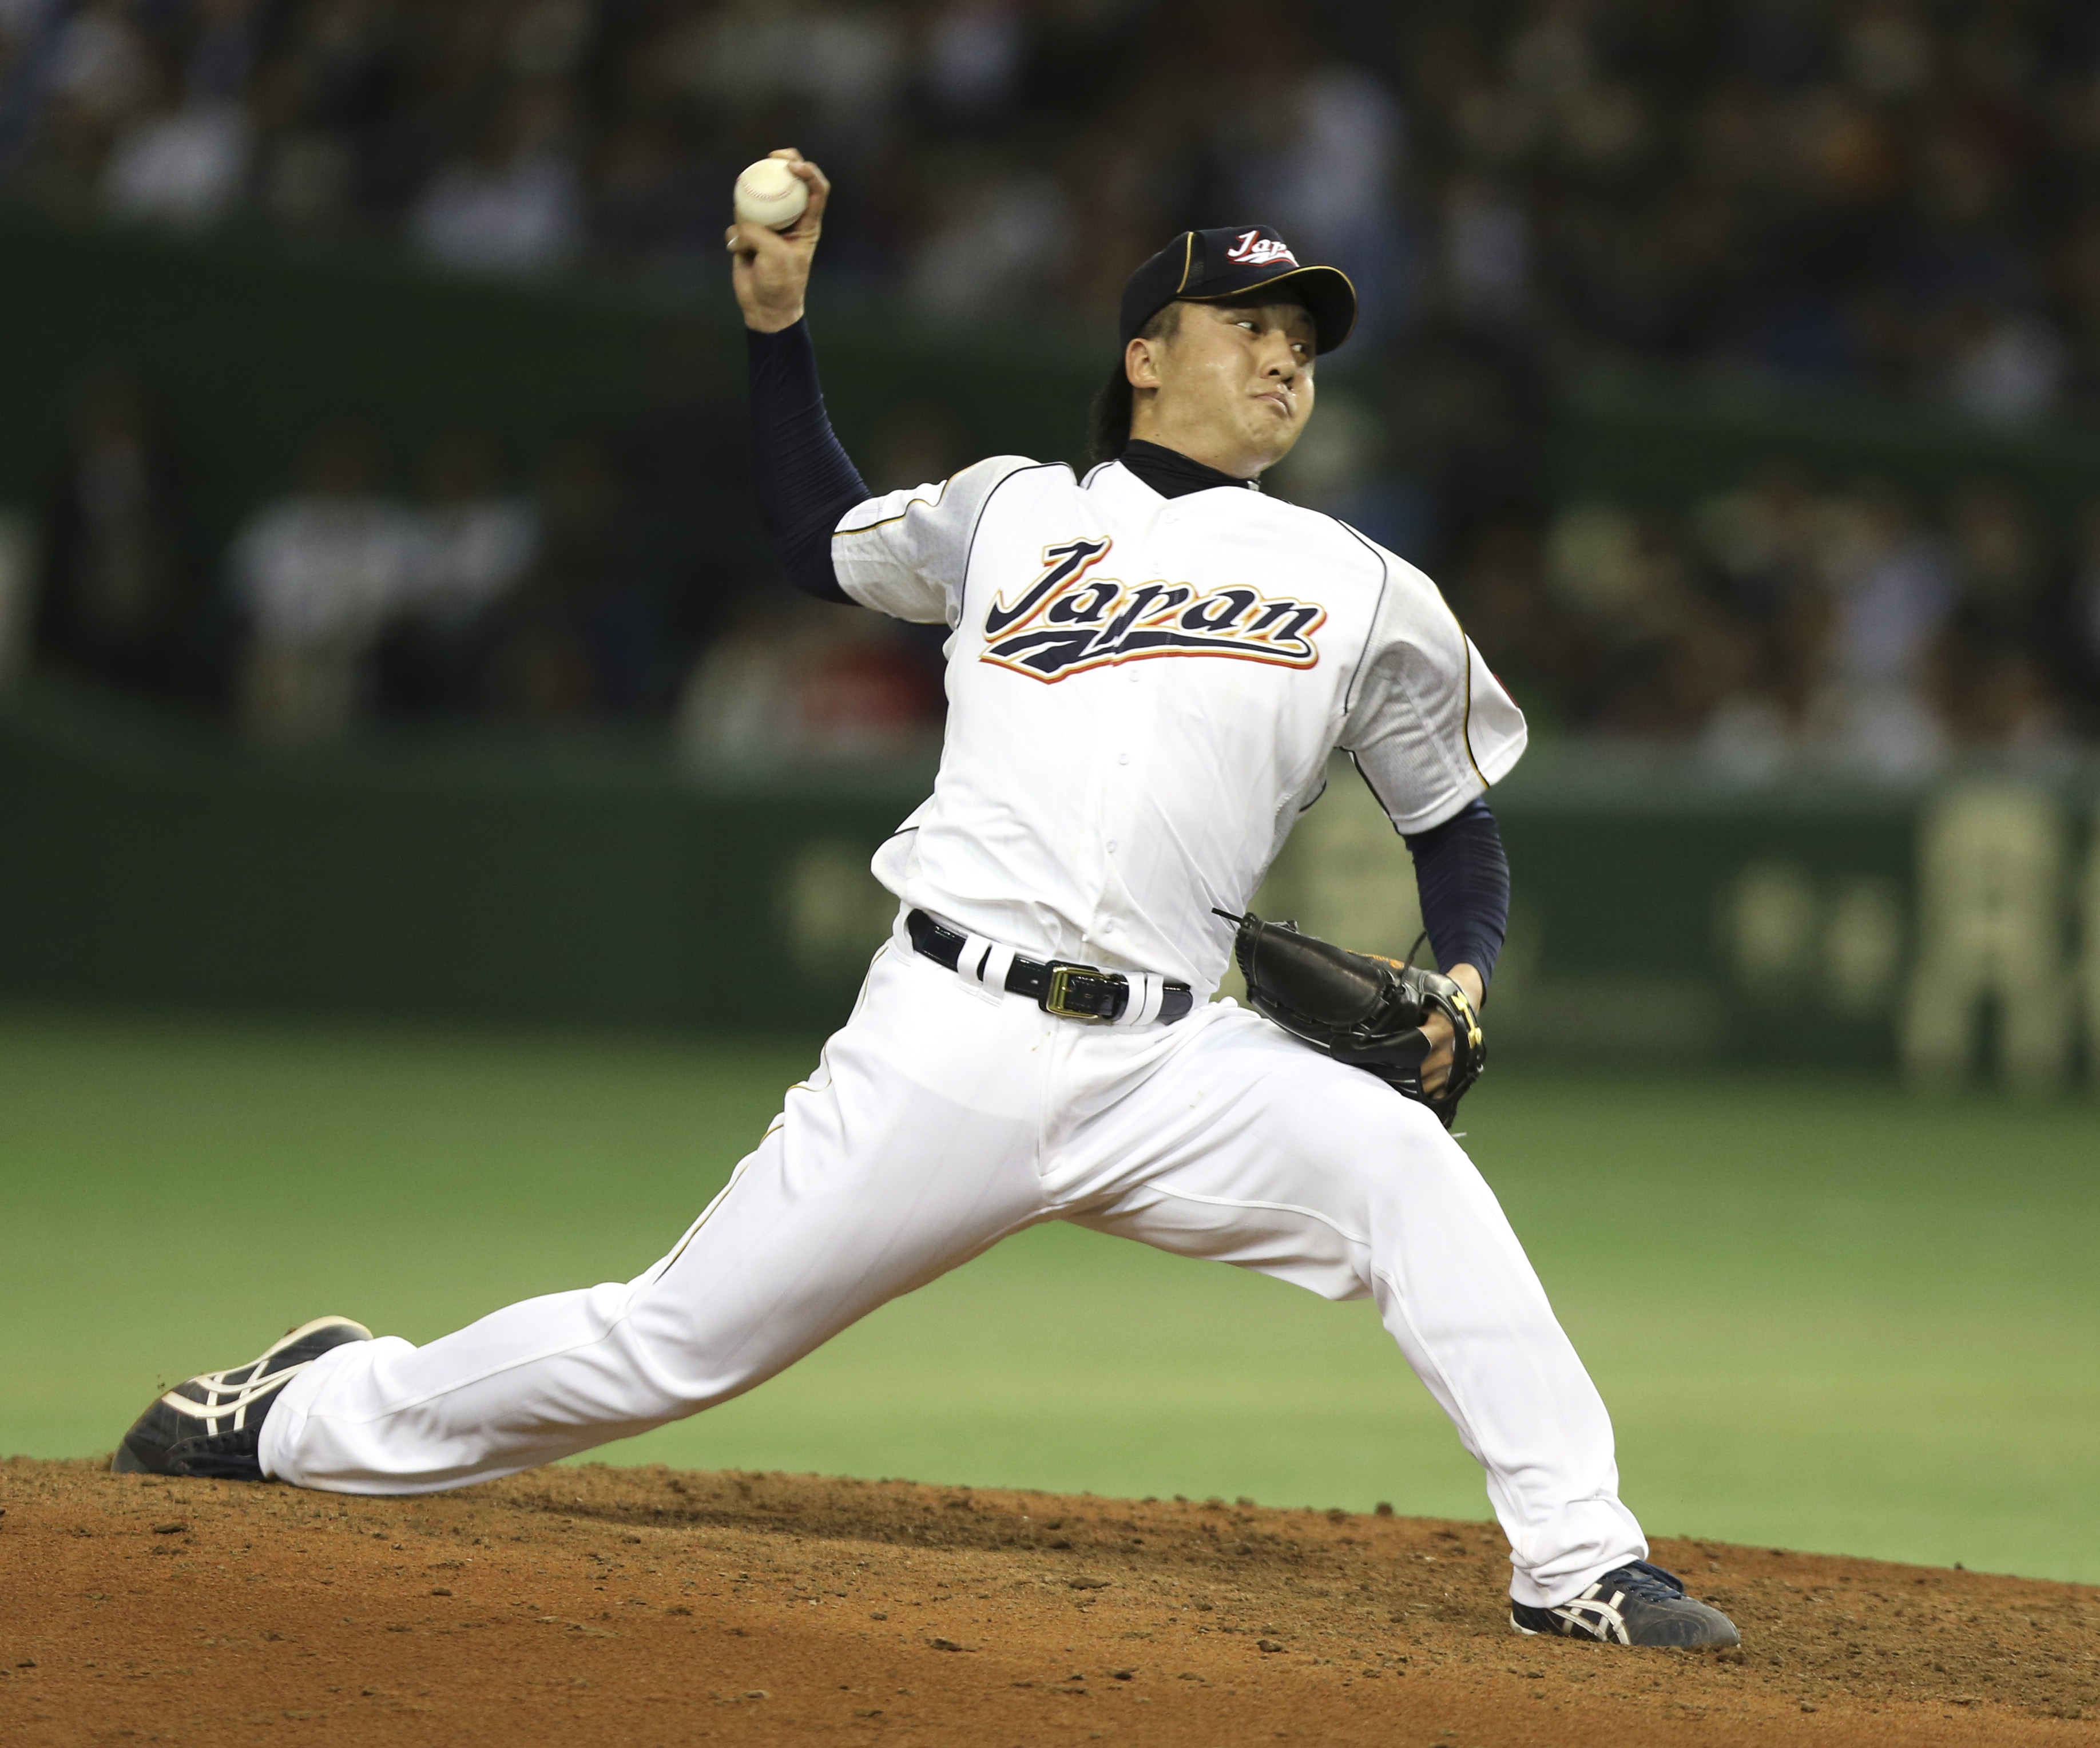 Hirokazu Sawamura of the Boston Red Sox pitches in a baseball game